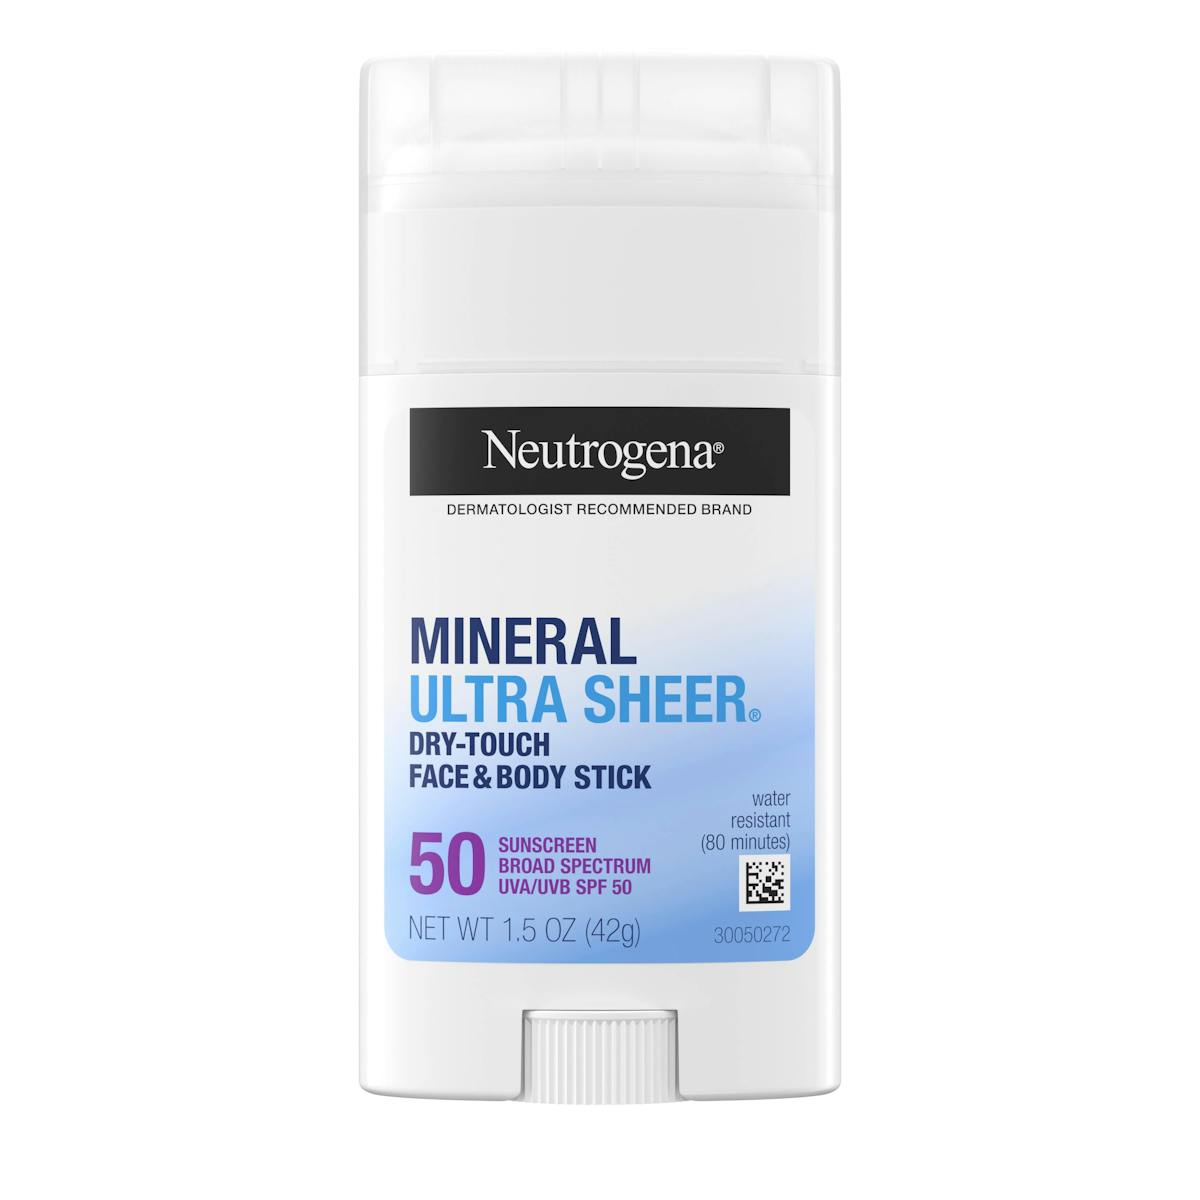 Mineral ULTRA SHEER® Dry-Touch Face & Body Stick Sunscreen SPF 50